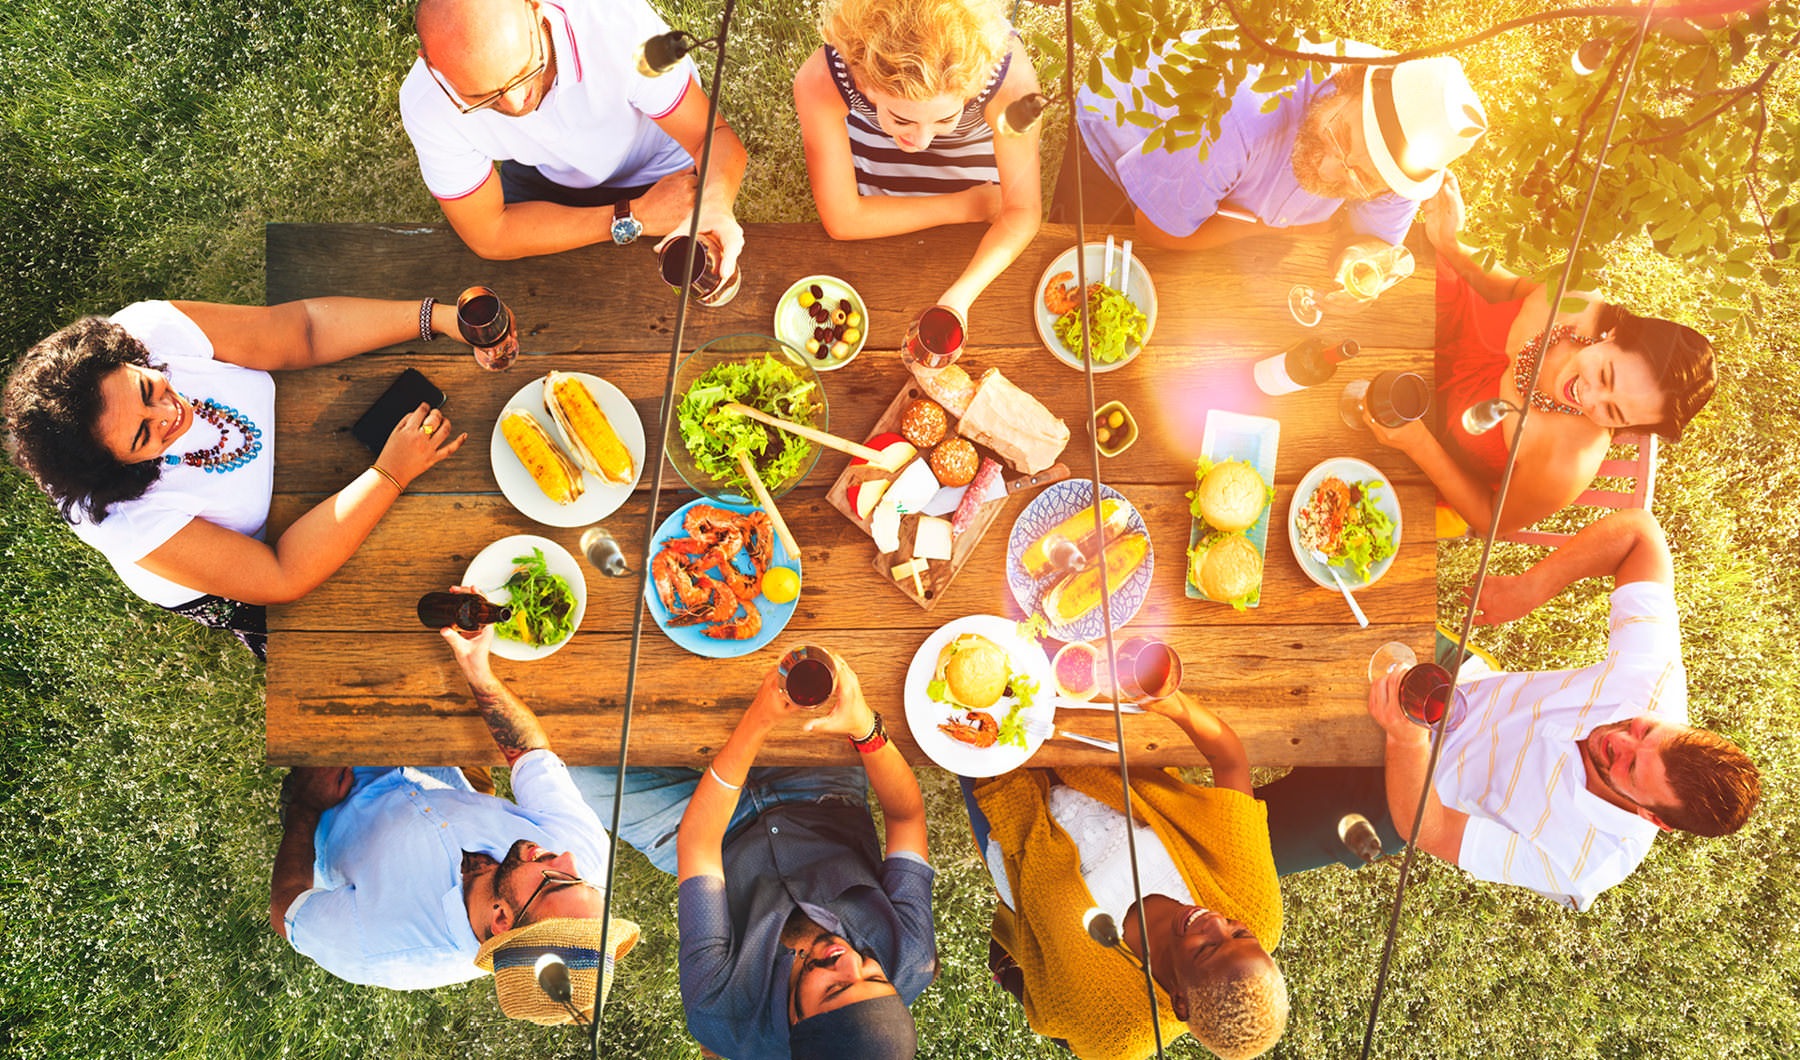 overhead view, looking down at a large picnic table full of food, surrounded by a group of people laughing and drinking 